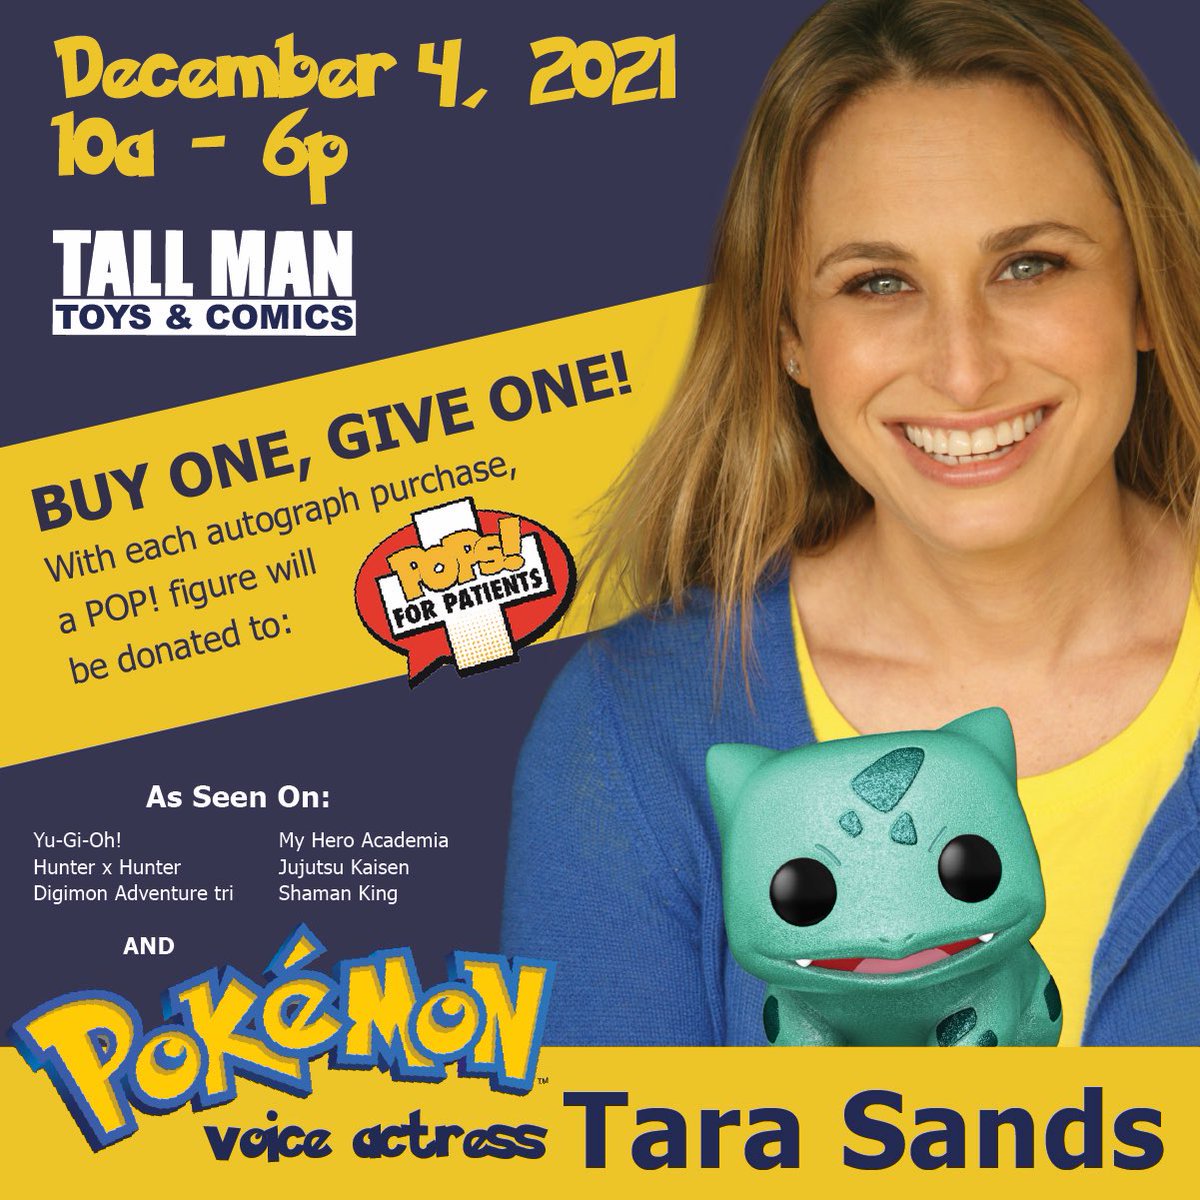 THIS SATURDAY meet @tarasandsla from 10-6! In honor of #givingtuesday with each Autograph purchase #tallmantoys will be donating in Pop to @easttnchildrens via @popsforpatients ! #getonegiveone 

tallmantoys.com/products/pokem…